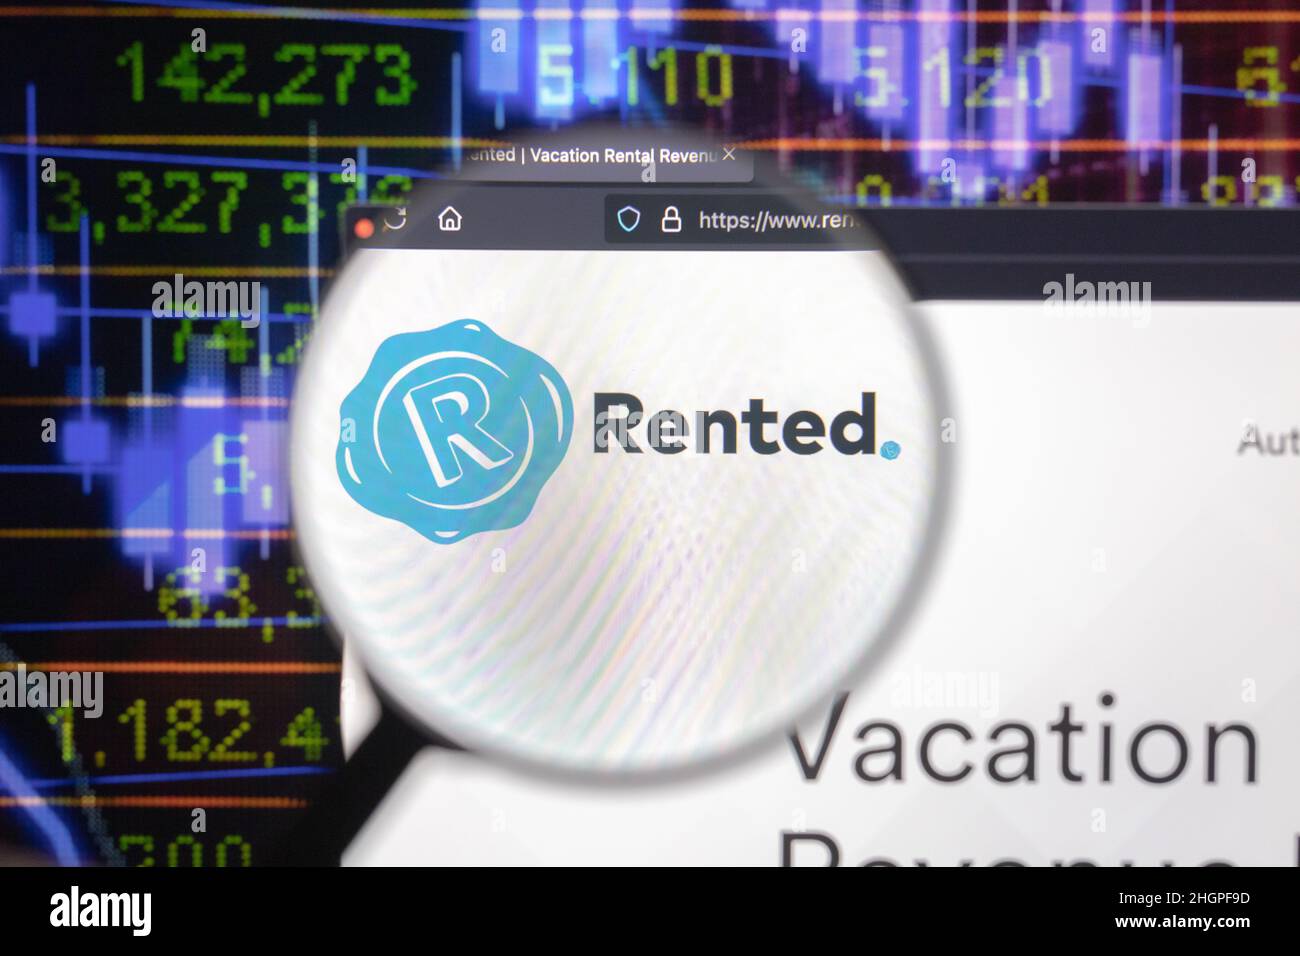 Rented company logo on a website with blurry stock market developments in the background, seen on a computer screen through a magnifying glass. Stock Photo